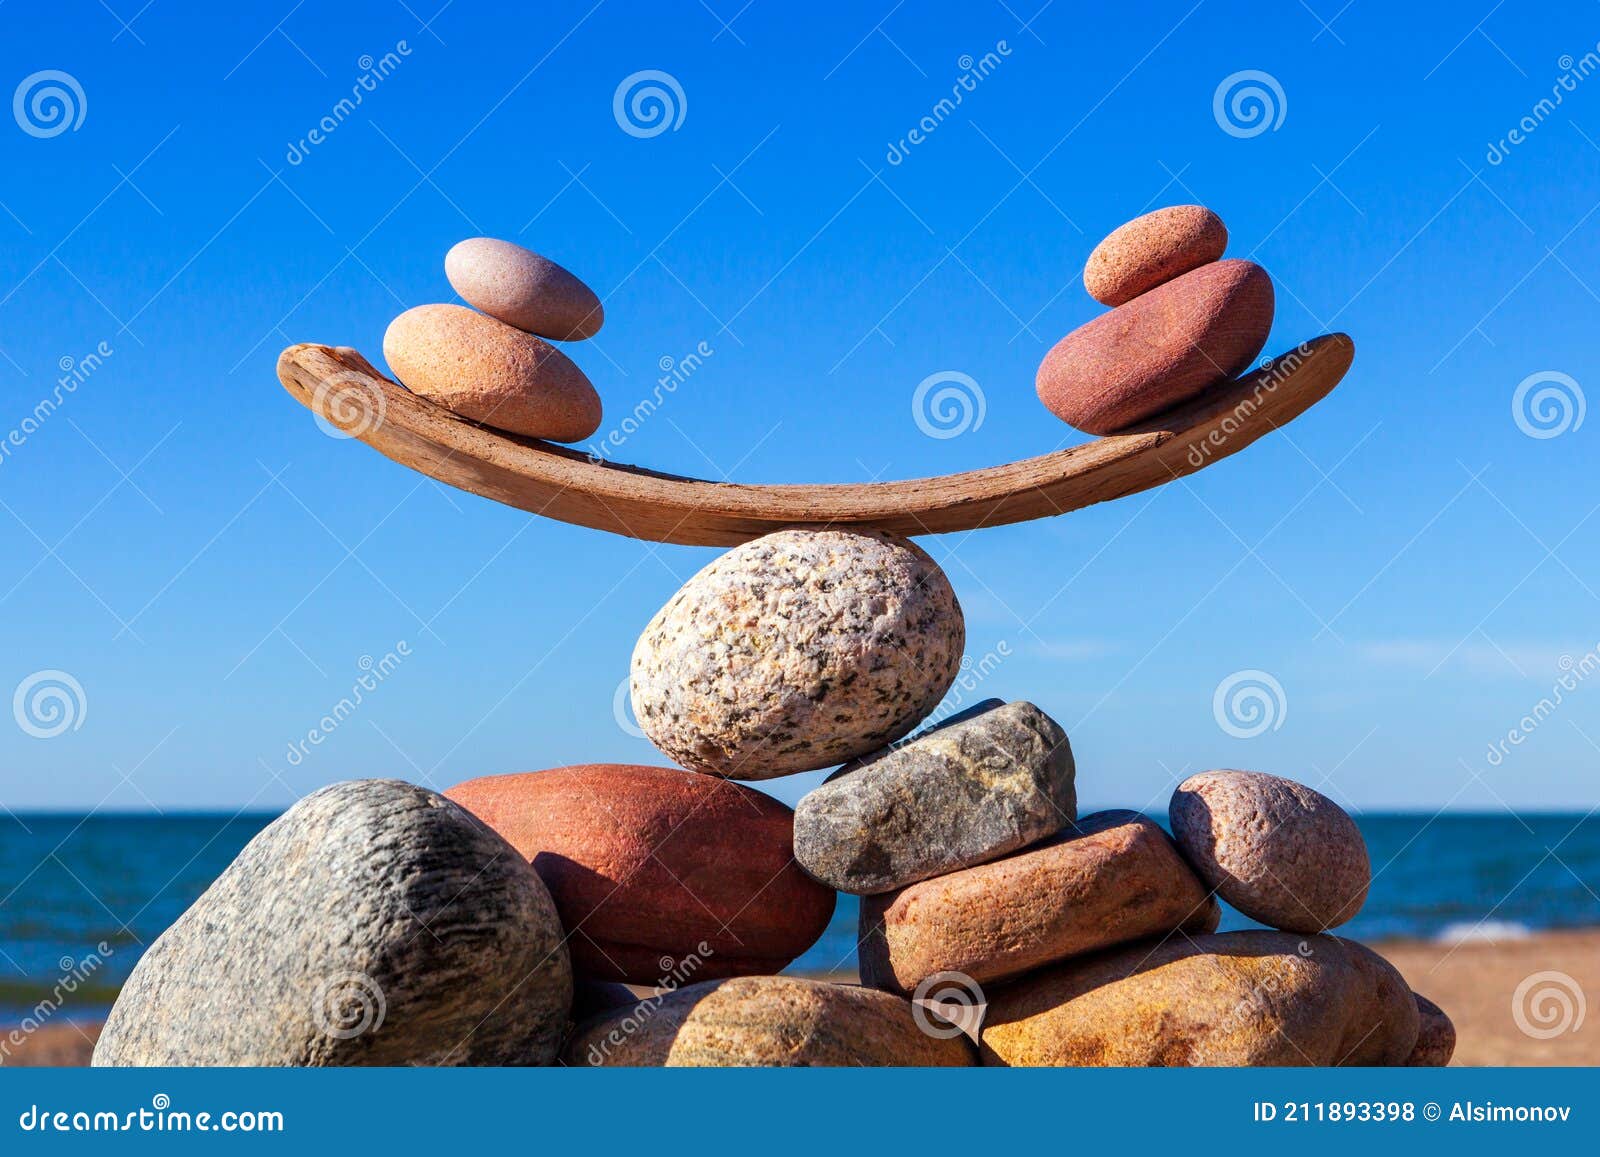 Concept of Life Balance and Harmony. Balance Stones Against the